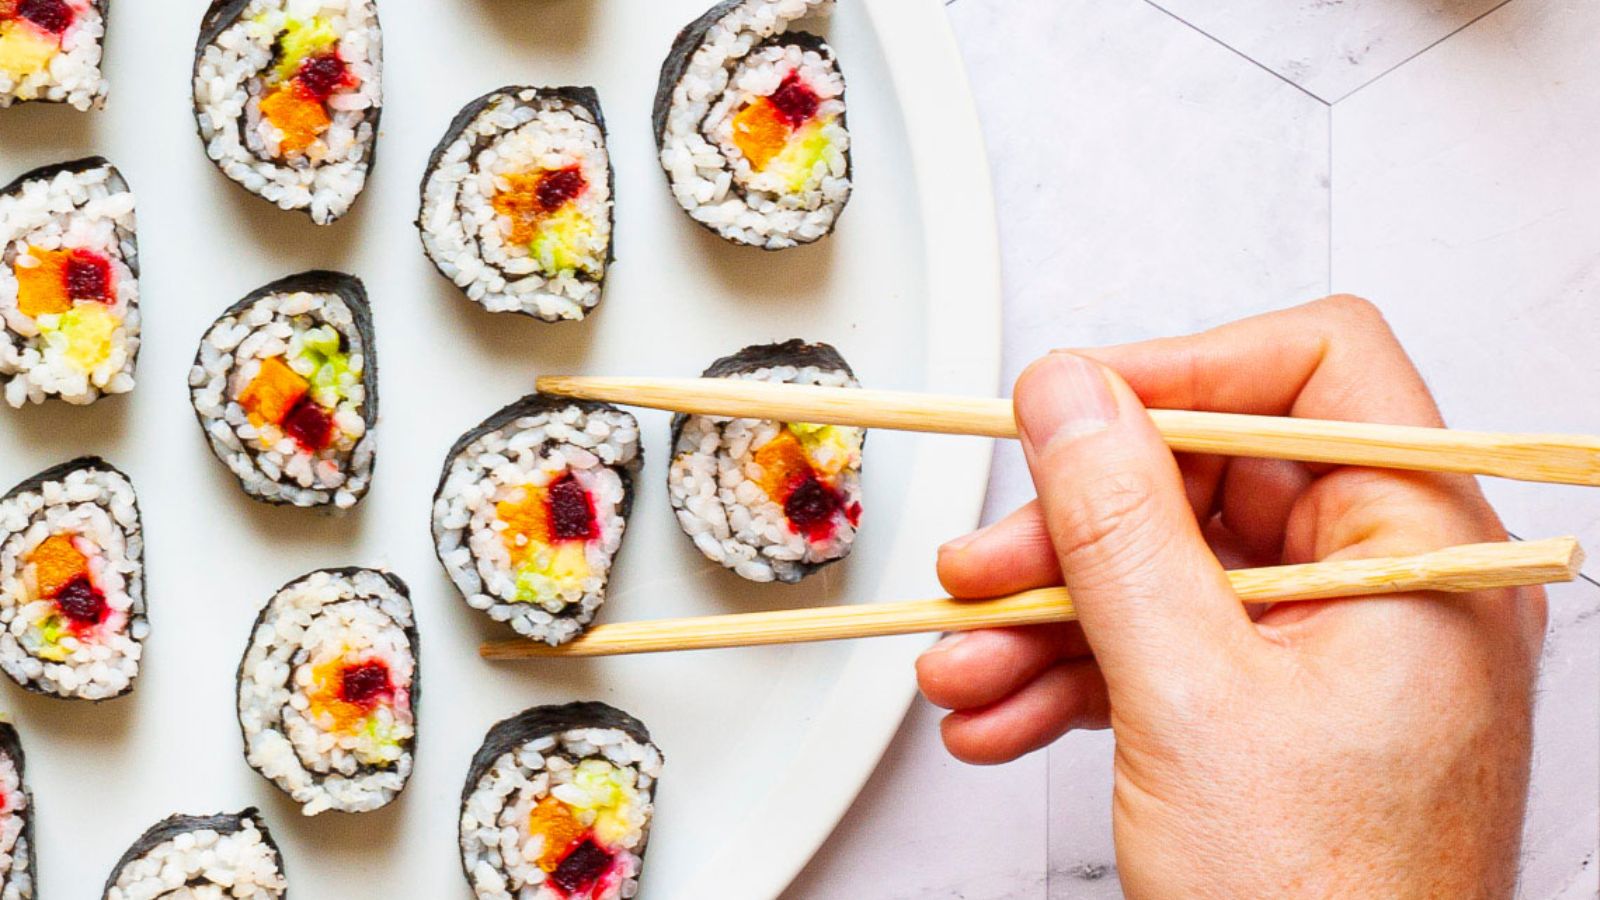 <p>The star of these sweet potato sushi rolls are maple roasted sweet potato, earthy beet, and creamy avocado wrapped up in sushi rice and nori sheets. It is the perfect combination of something sweet, savory, and umami that the whole family will love.</p><p><strong>Recipe: <a href="https://mypureplants.com/sweet-potato-sushi-rolls/">sweet potato sushi rolls</a></strong></p>